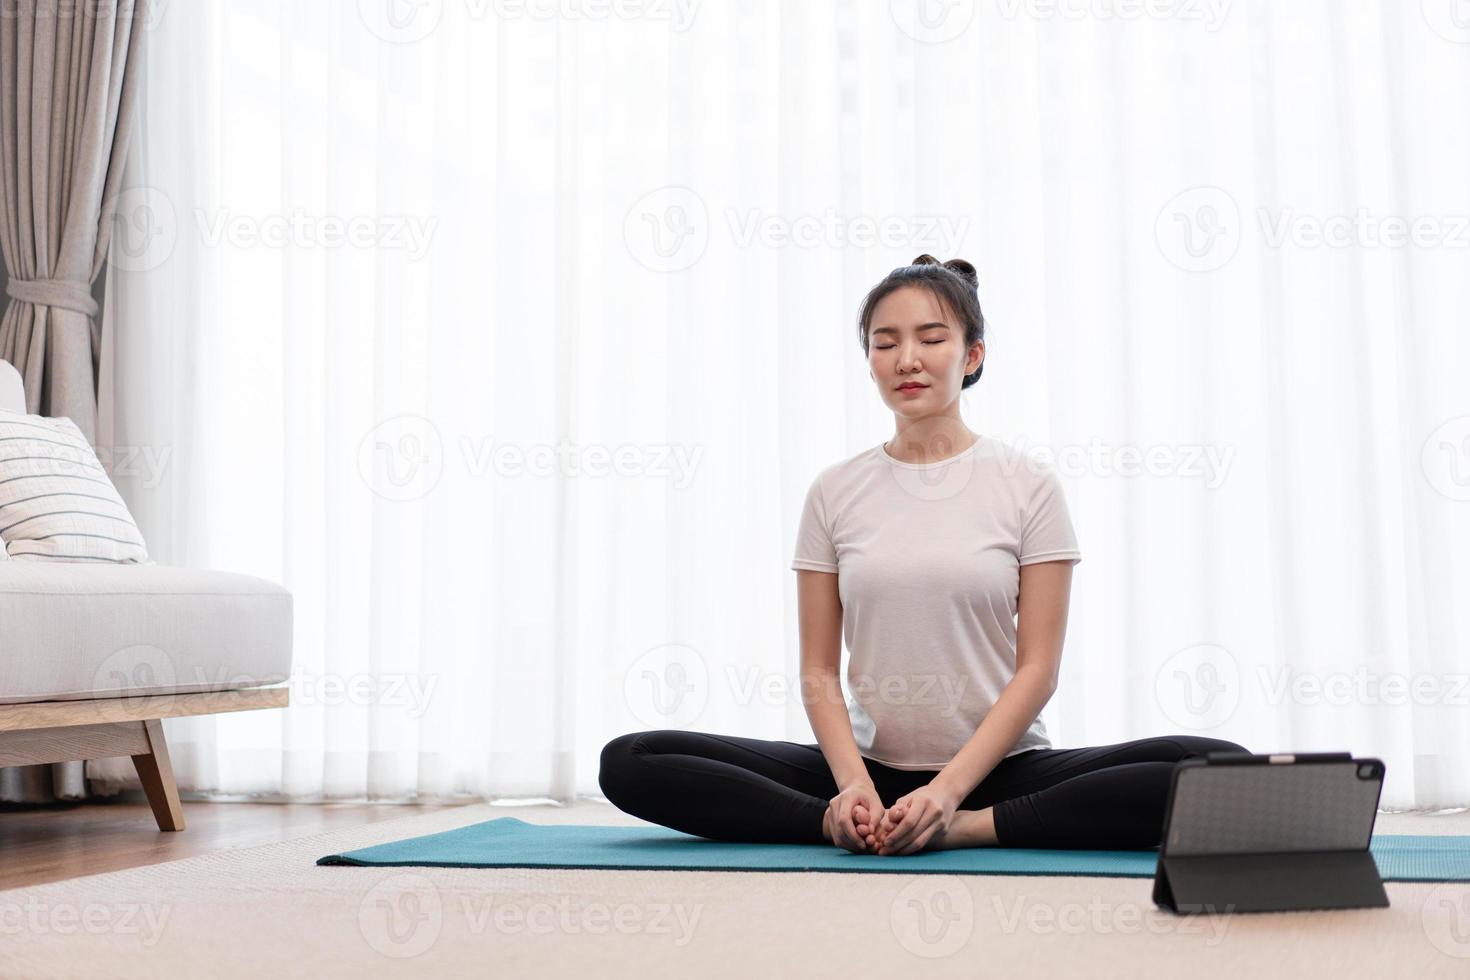 Productive activity concept a calm girl concentrating on meditating alone among peaceful atmosphere in the living room photo